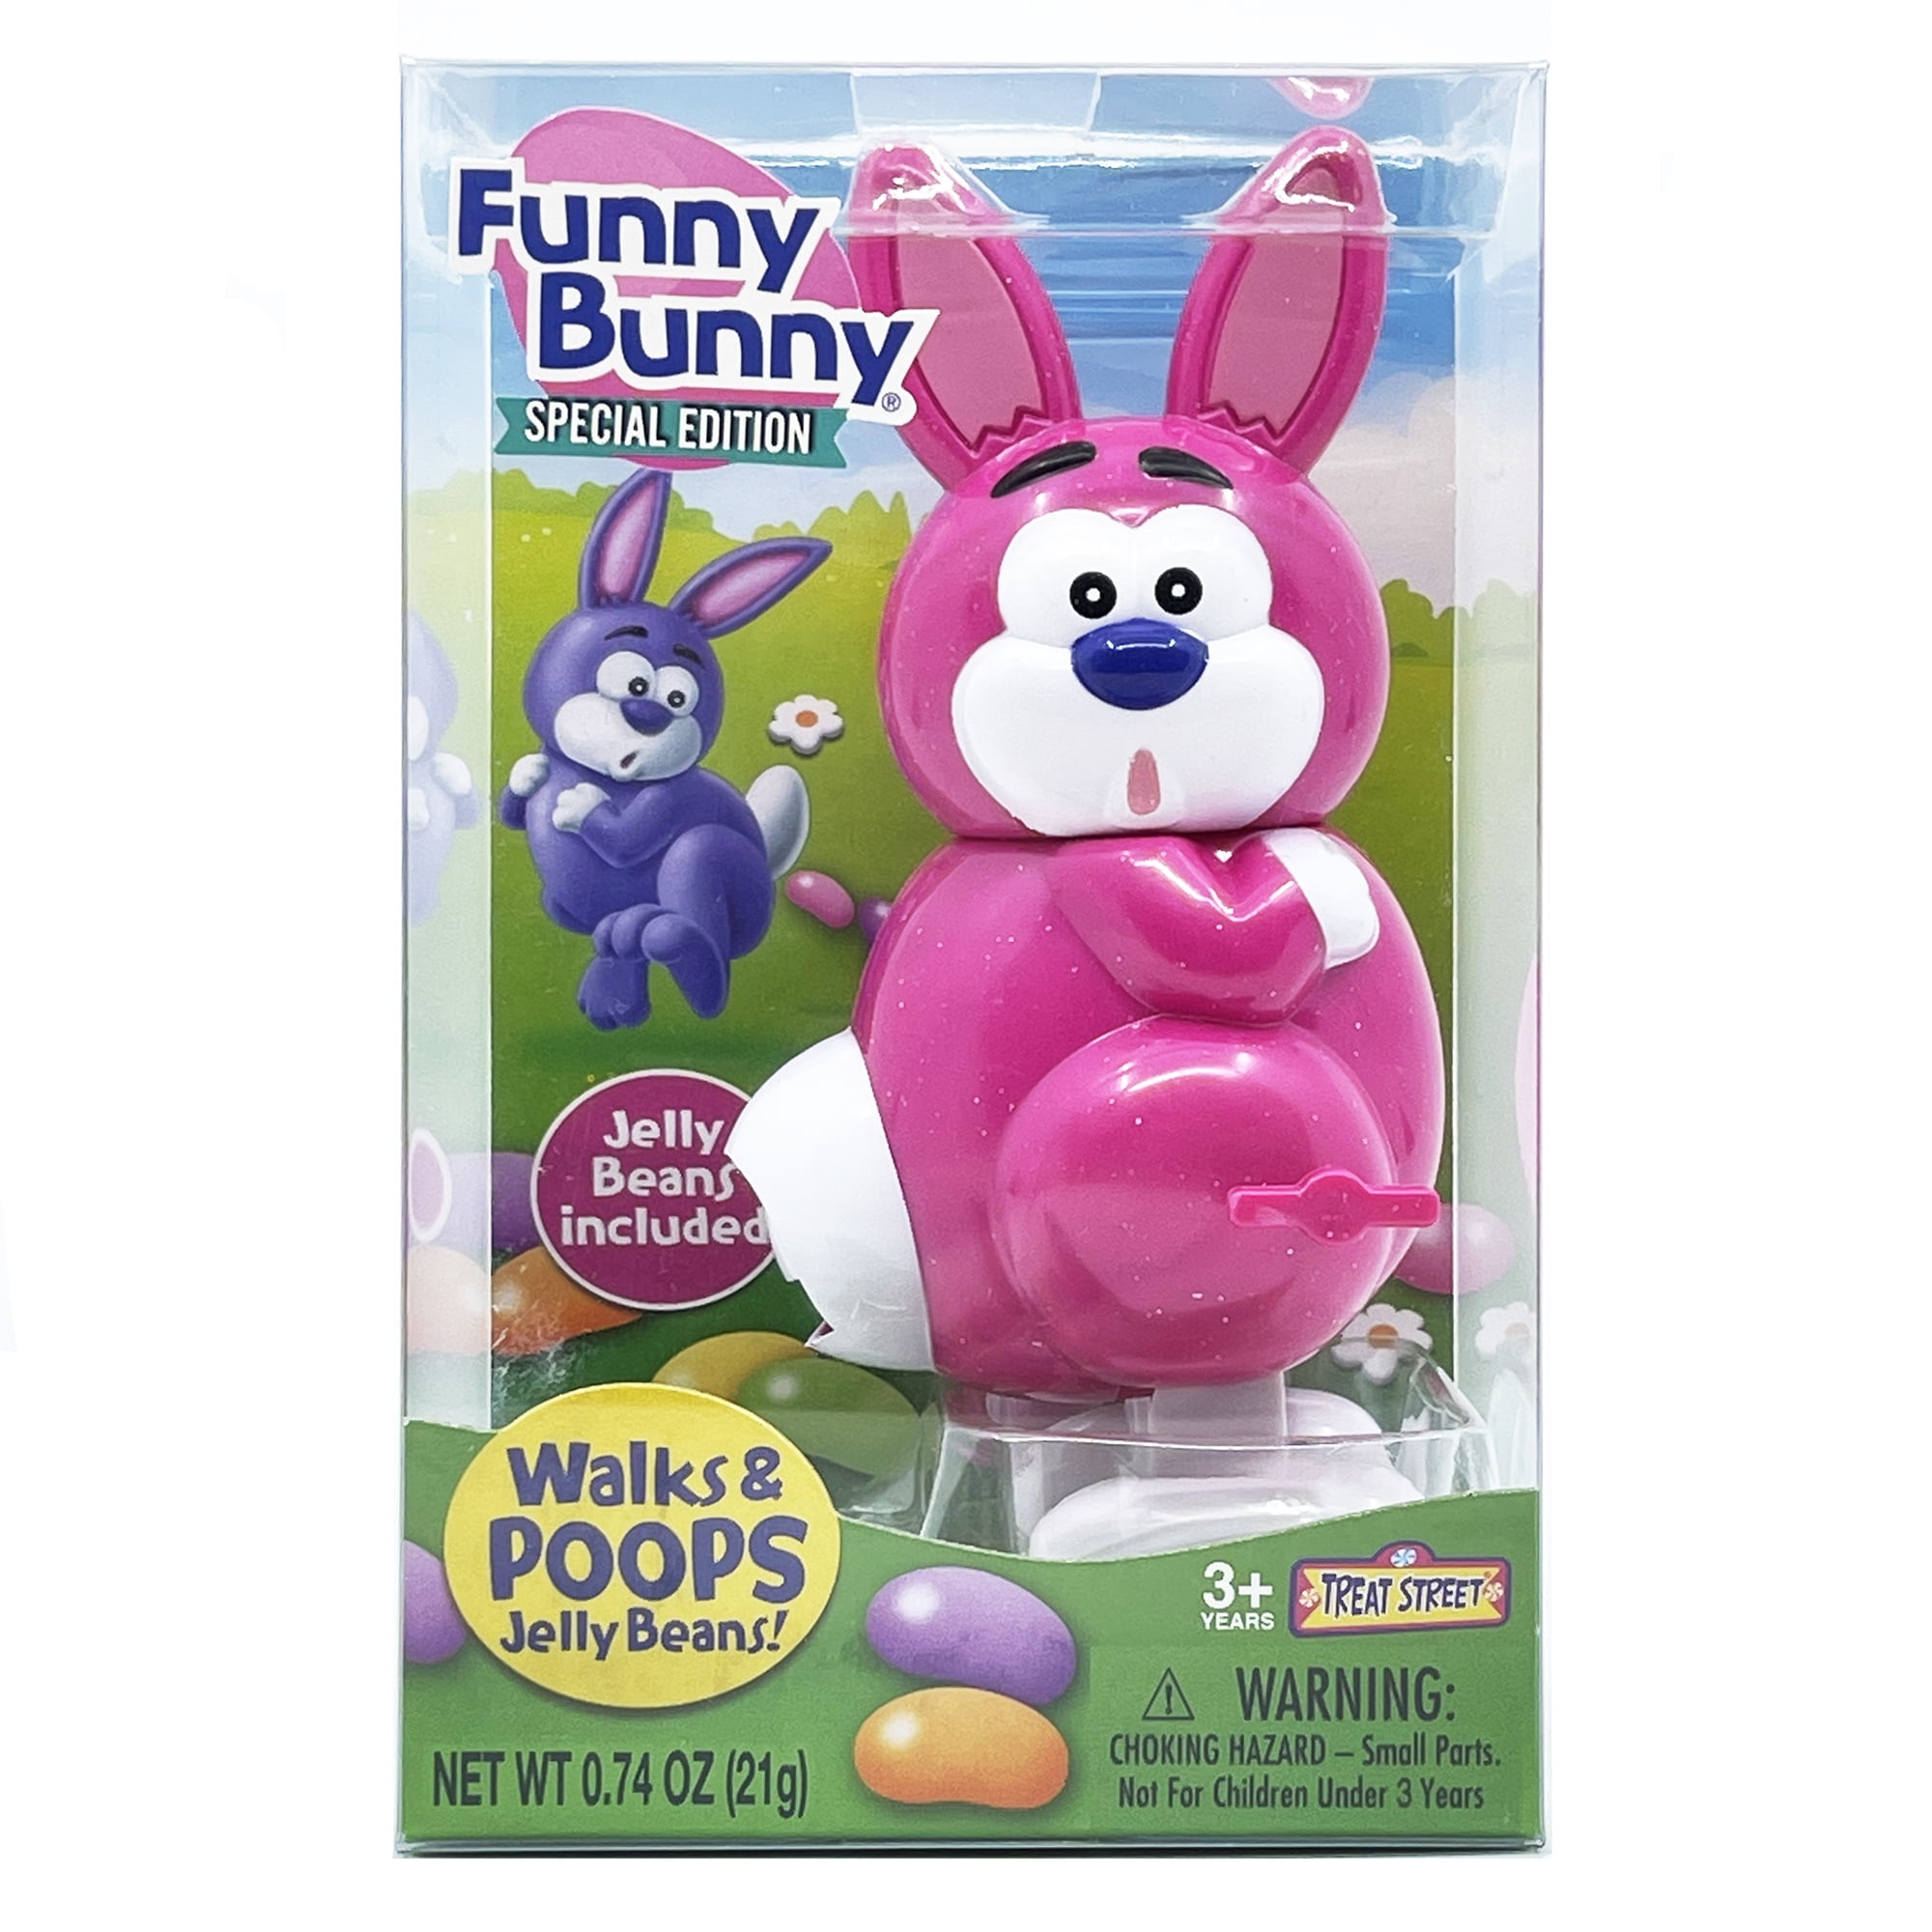 Crazy Deal,New Sealed Funny Bunny Game. for Sale in Trenton, NJ - OfferUp